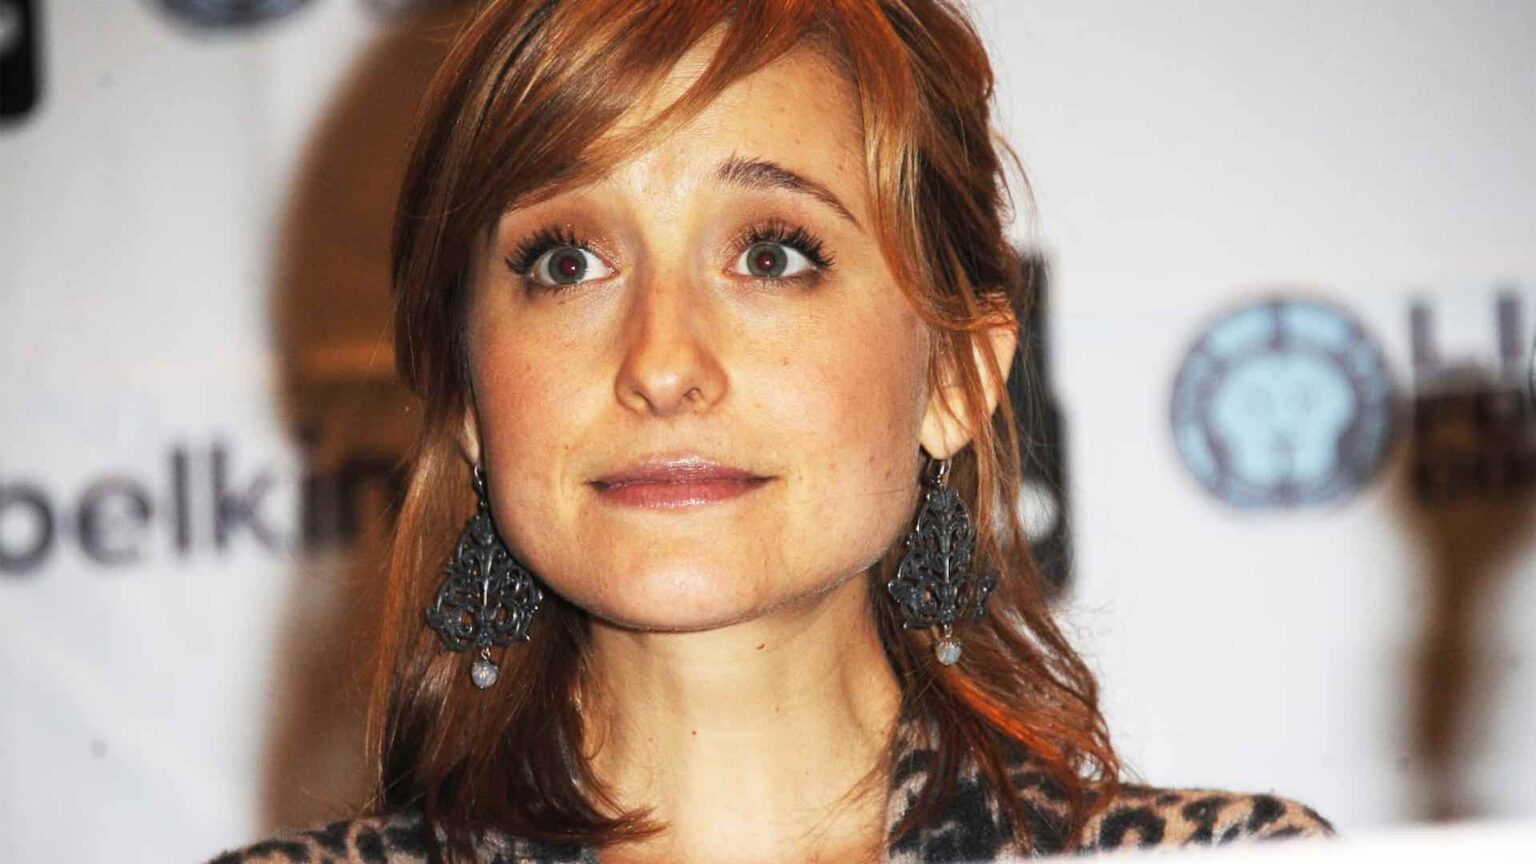 Former Smallville star Allison Mack isn’t the only celebrity to be lured into the NXIVM cult. We've compiled a list of other women who took part.